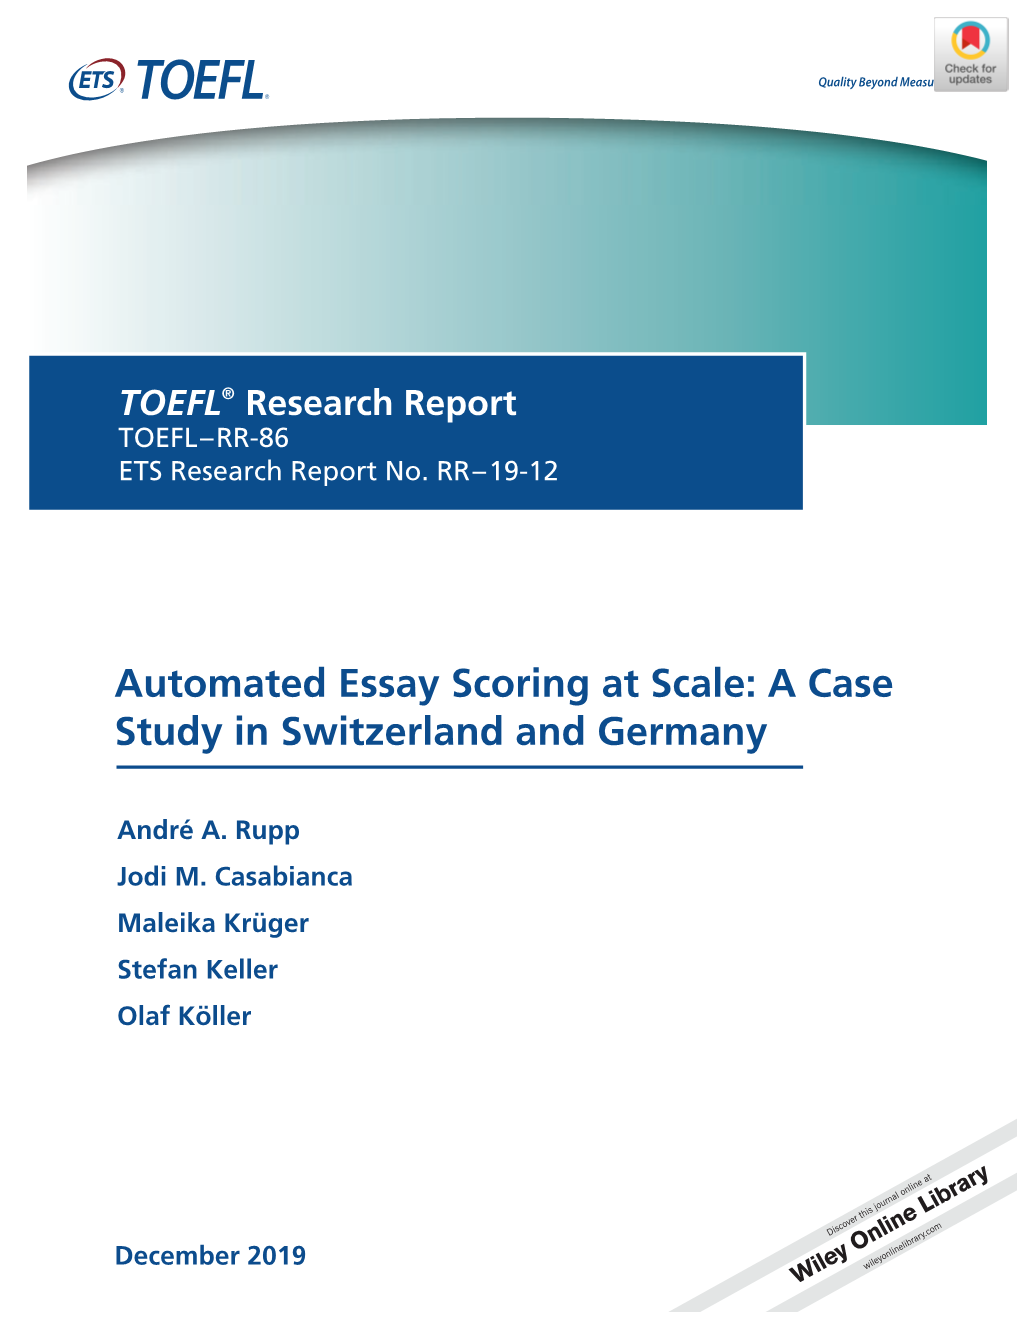 Automated Essay Scoring at Scale: a Case Study in Switzerland and Germany